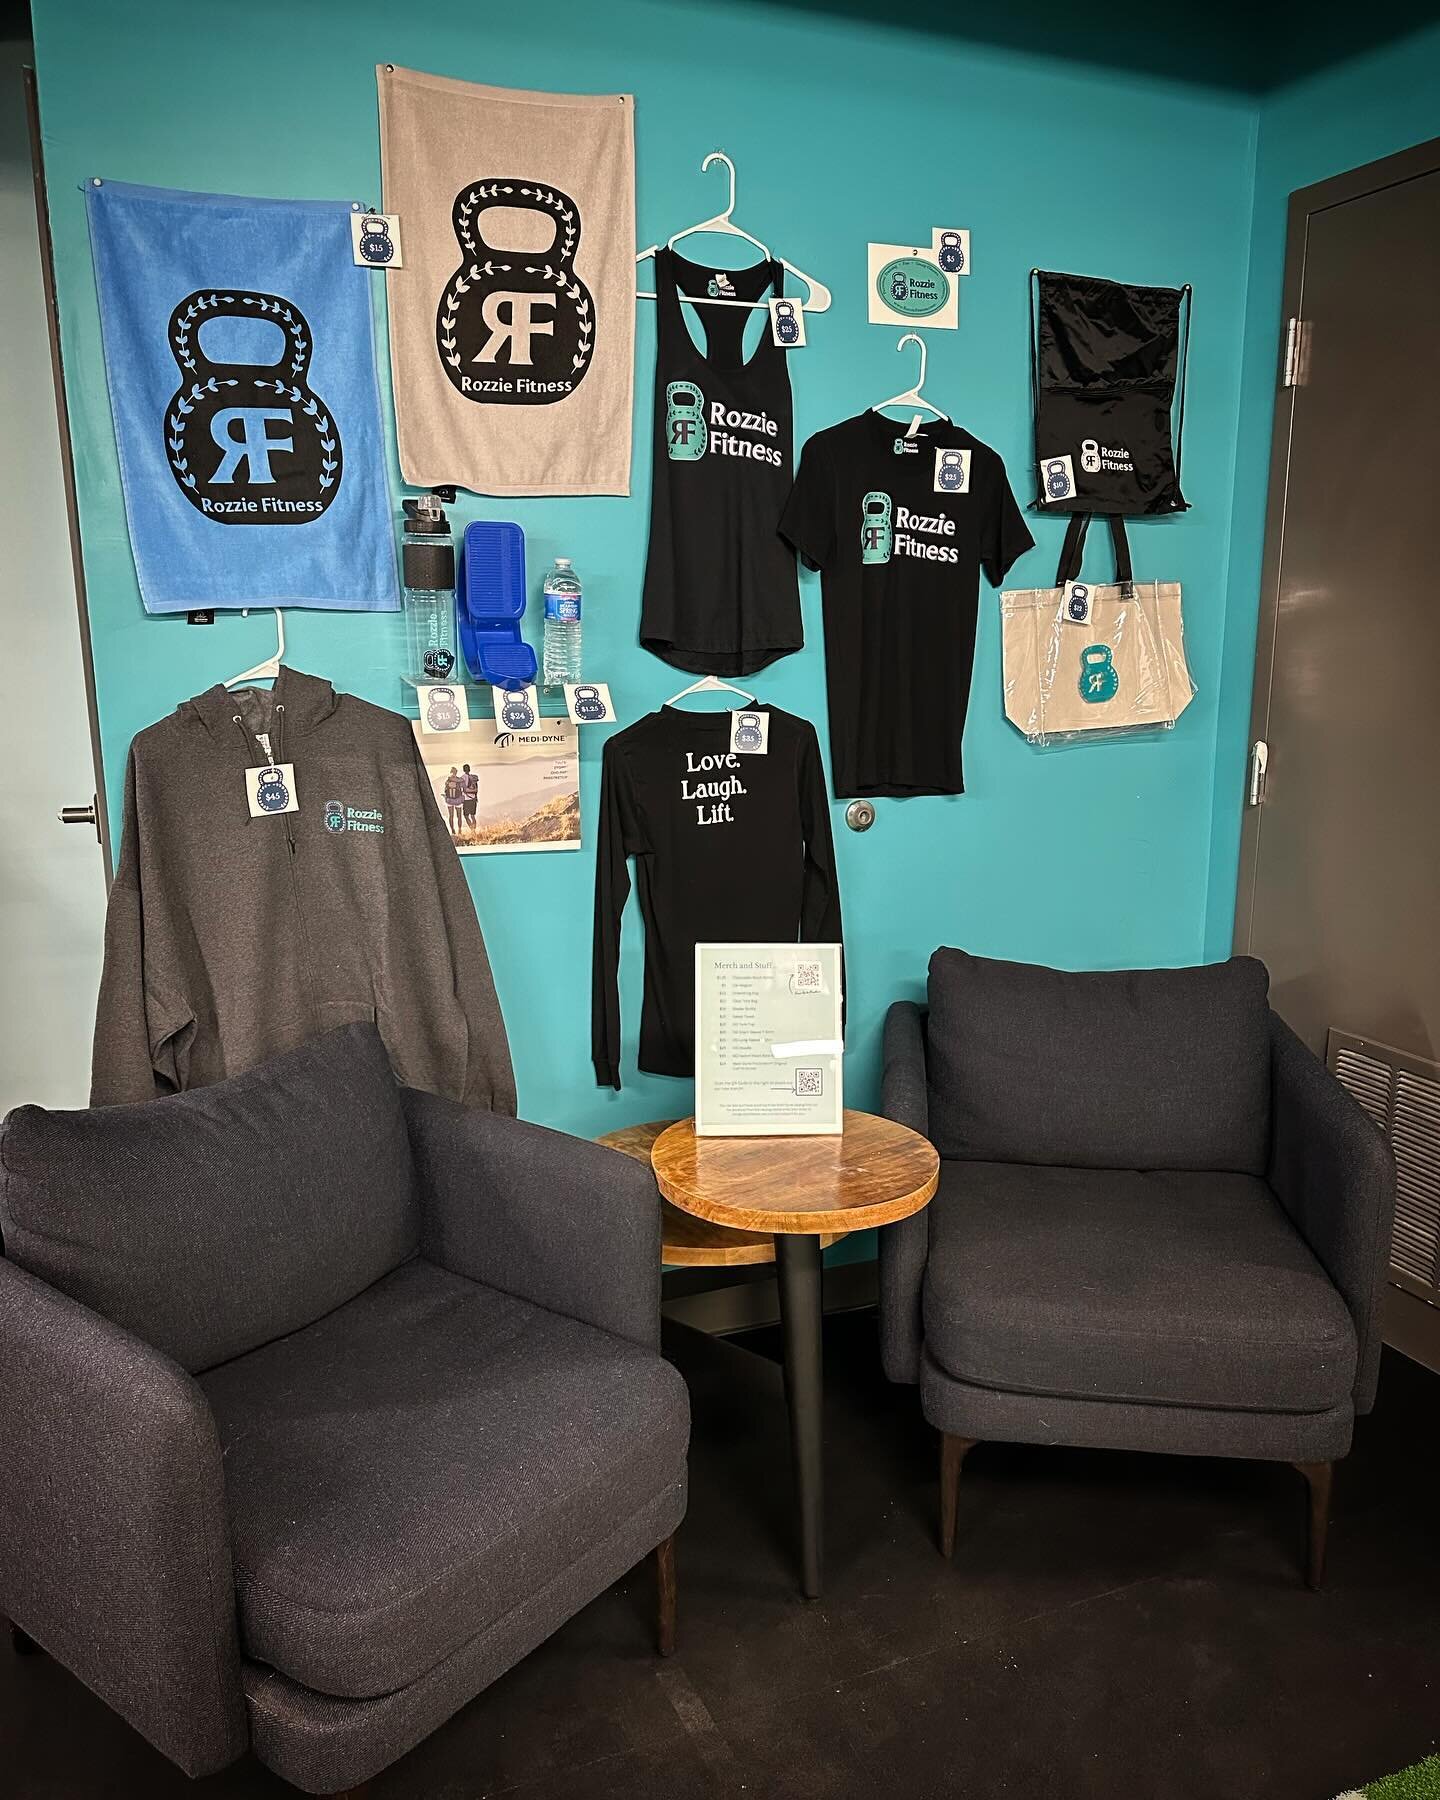 The merch wall has relocated! Limited quantities available of the OG merch, get it before it&rsquo;s gone forever!

Click the &ldquo;learn more&rdquo; link in our bio to buy merch!

#rozziefitness #rozziefitnessmerch